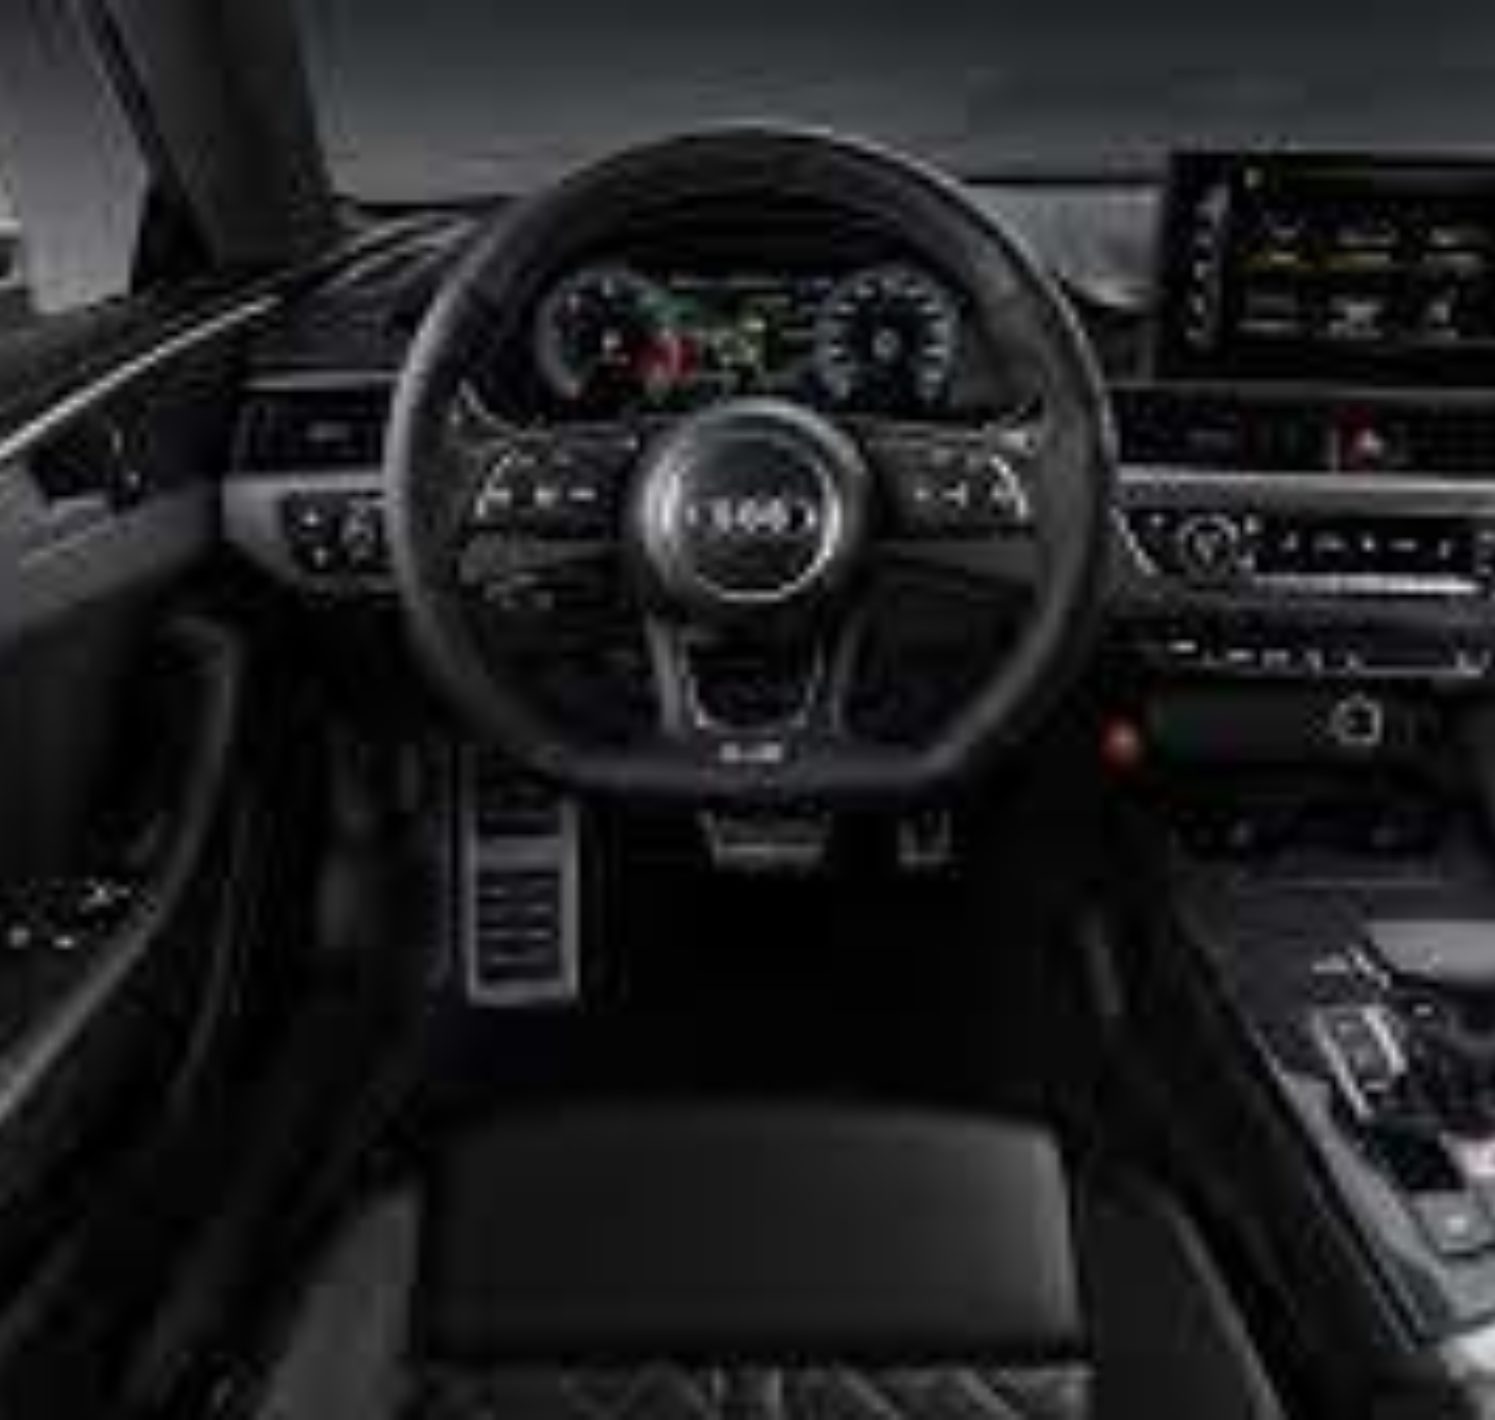 https://autofilter.sk/assets/images/s5-coupe/gallery/S5-Coupe-interior.jpg - obrazok